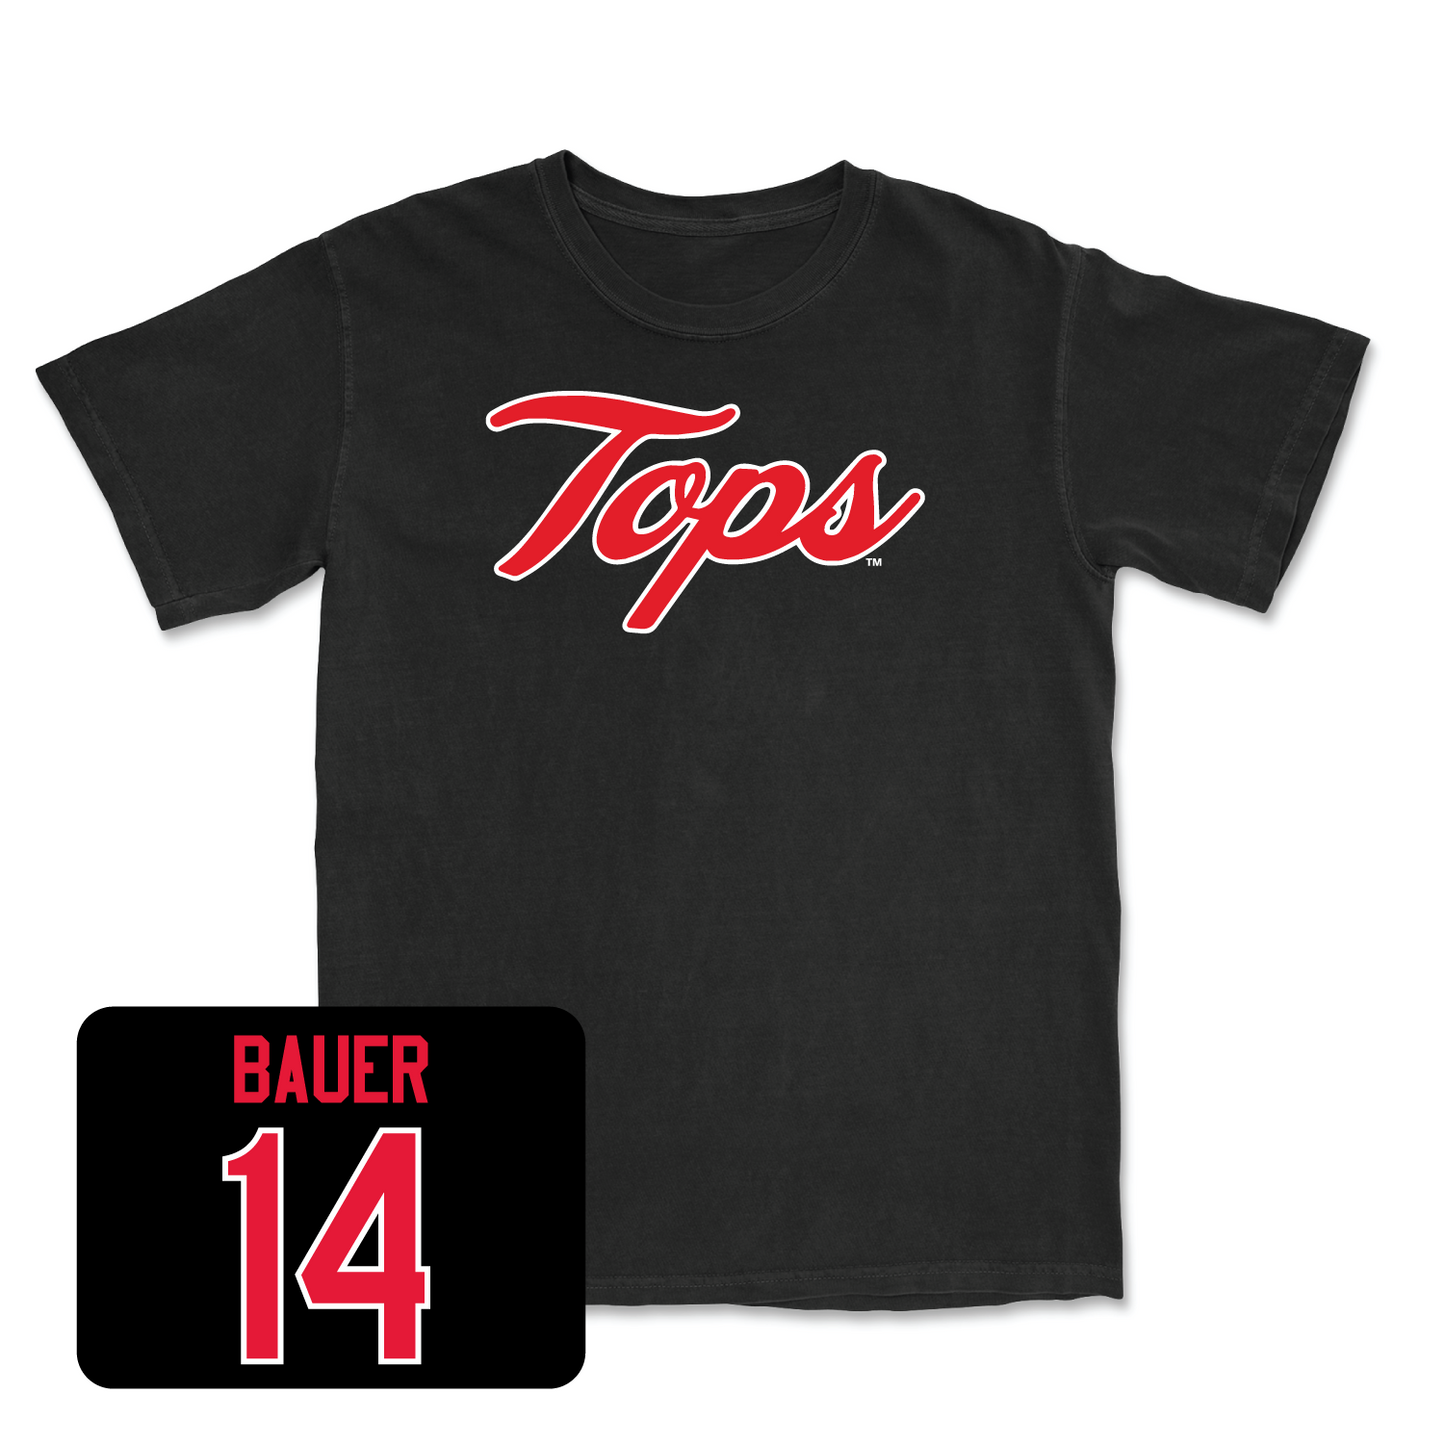 Black Women's Volleyball Tops Tee Large / Callie Bauer | #14